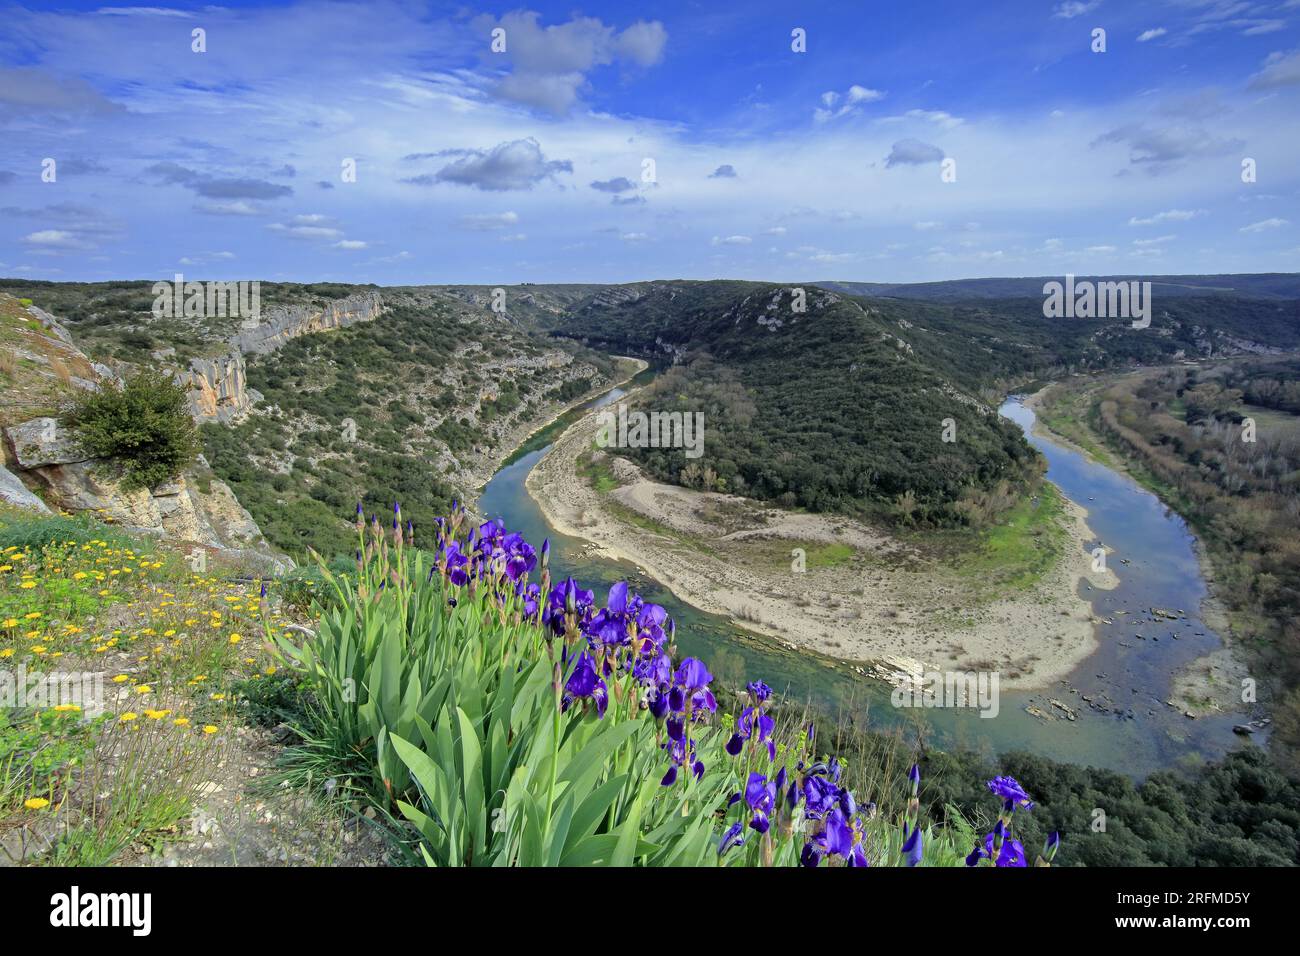 France, Gard department, Sainte-Anastasie, Russan the gorges of the Gardon, the meander since the Castellas. Iris in bloom in the foreground. Stock Photo